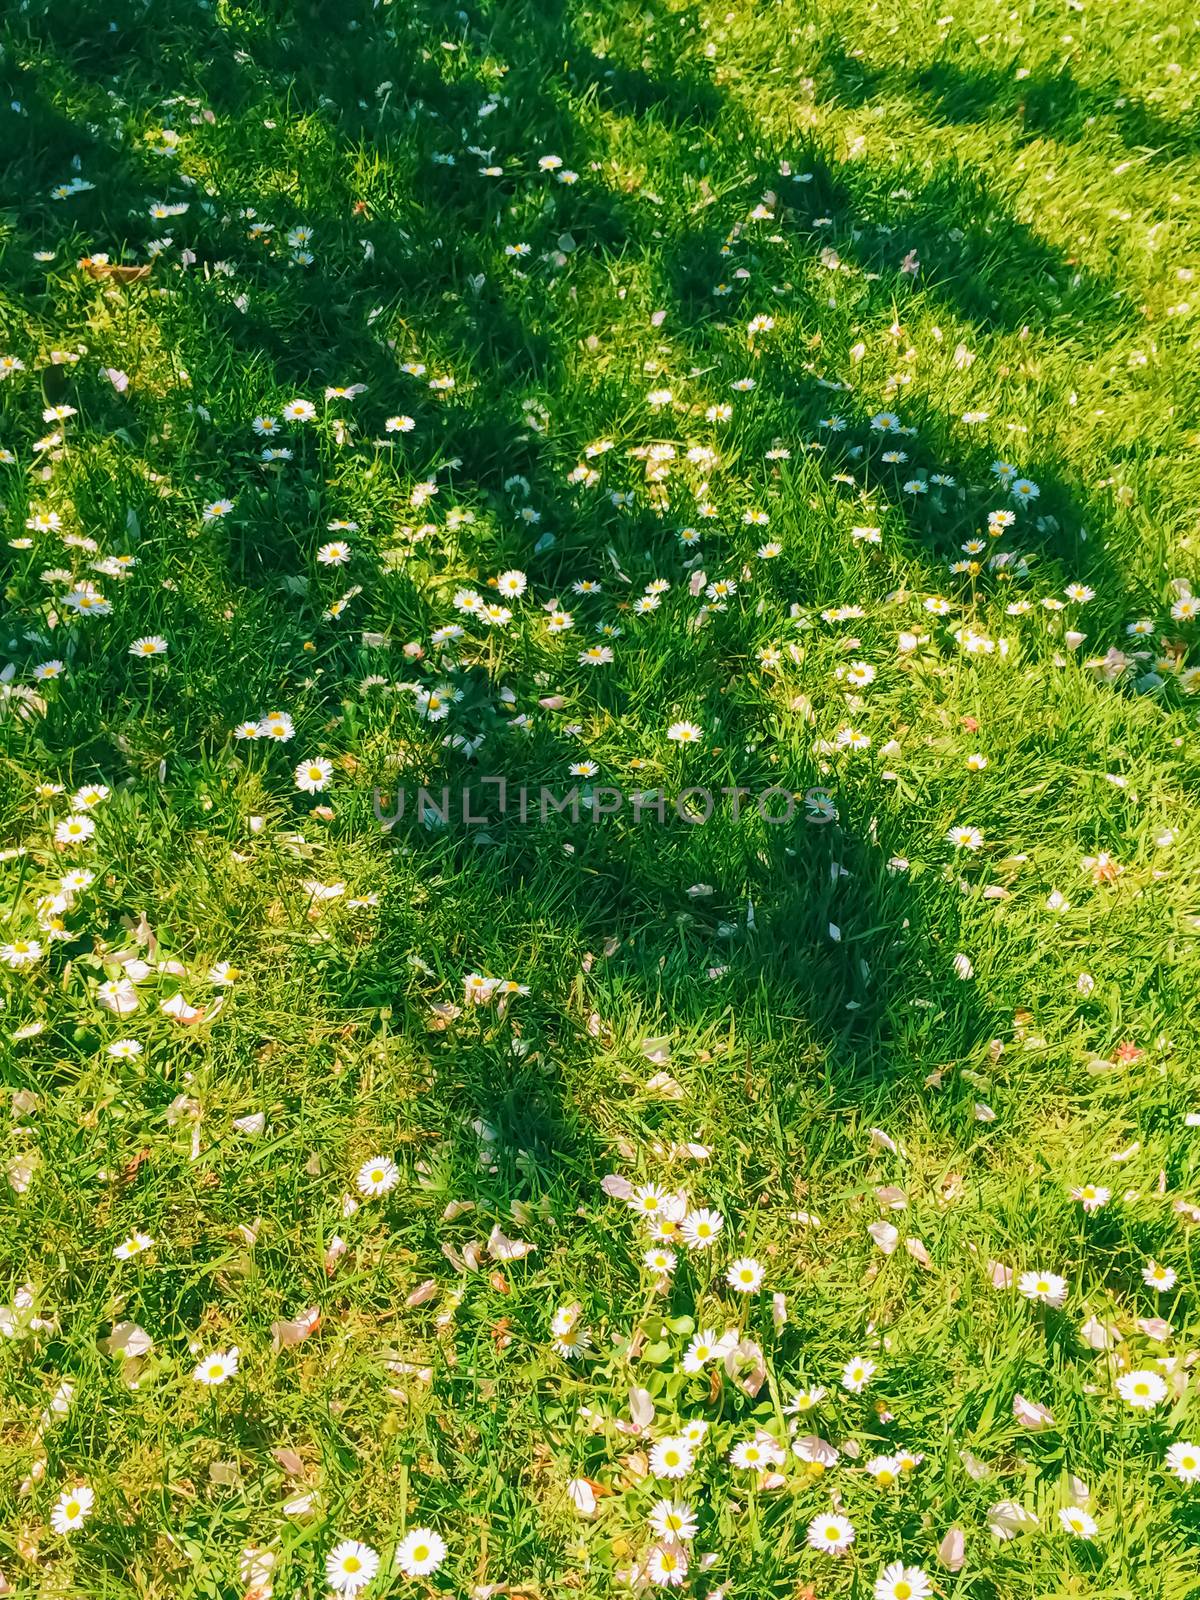 Daisy flowers and green grass in spring, nature and outdoors by Anneleven